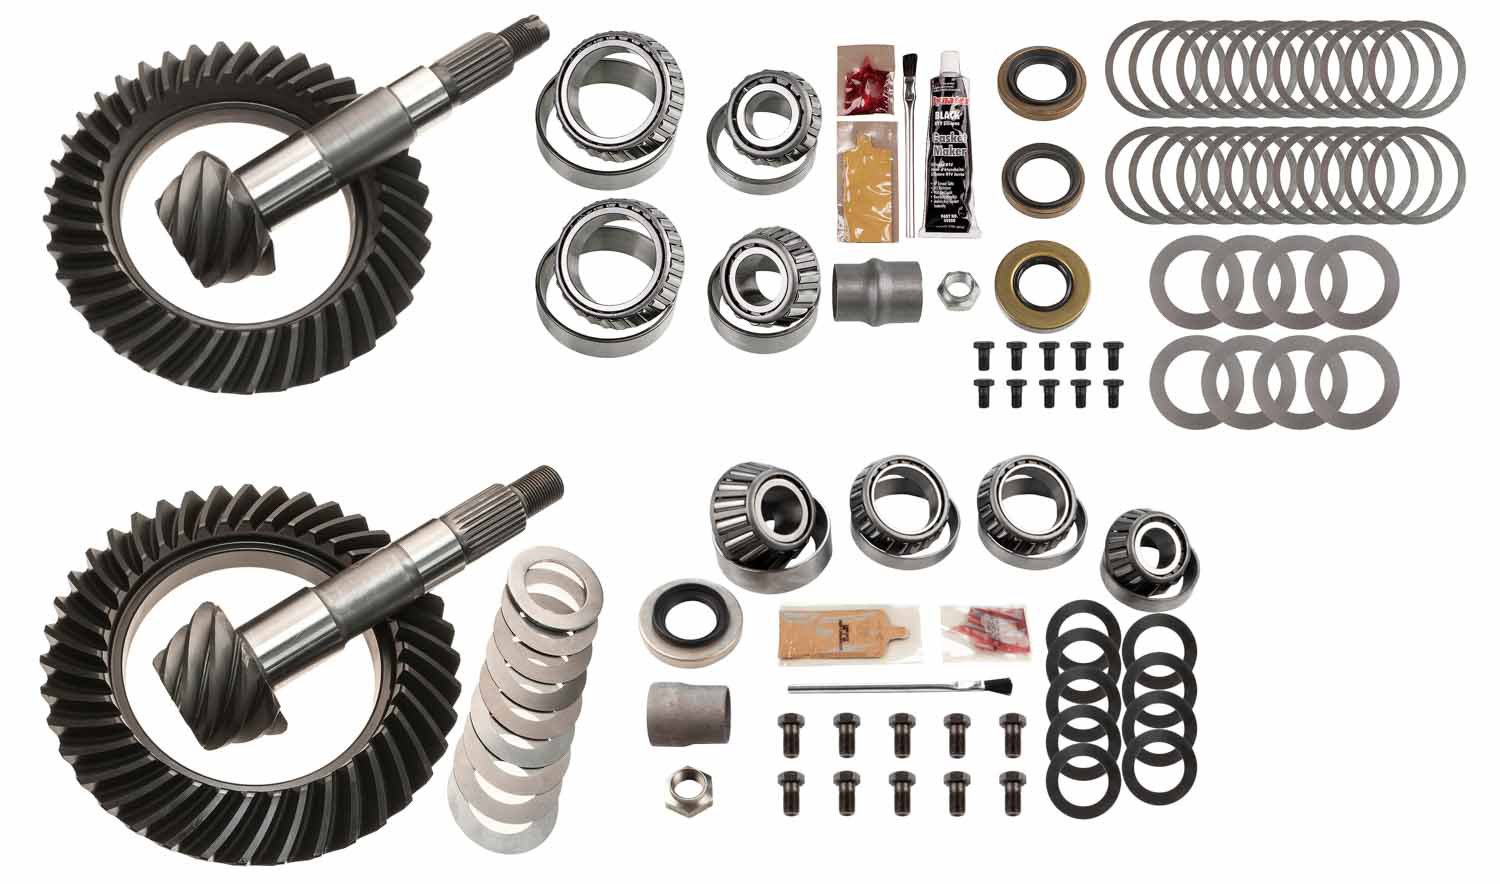 Complete Front and Rear Ring and Pinion Kit 1989-1995 Toyota Pickup, 4Runner V6 - 5.29 Ratio